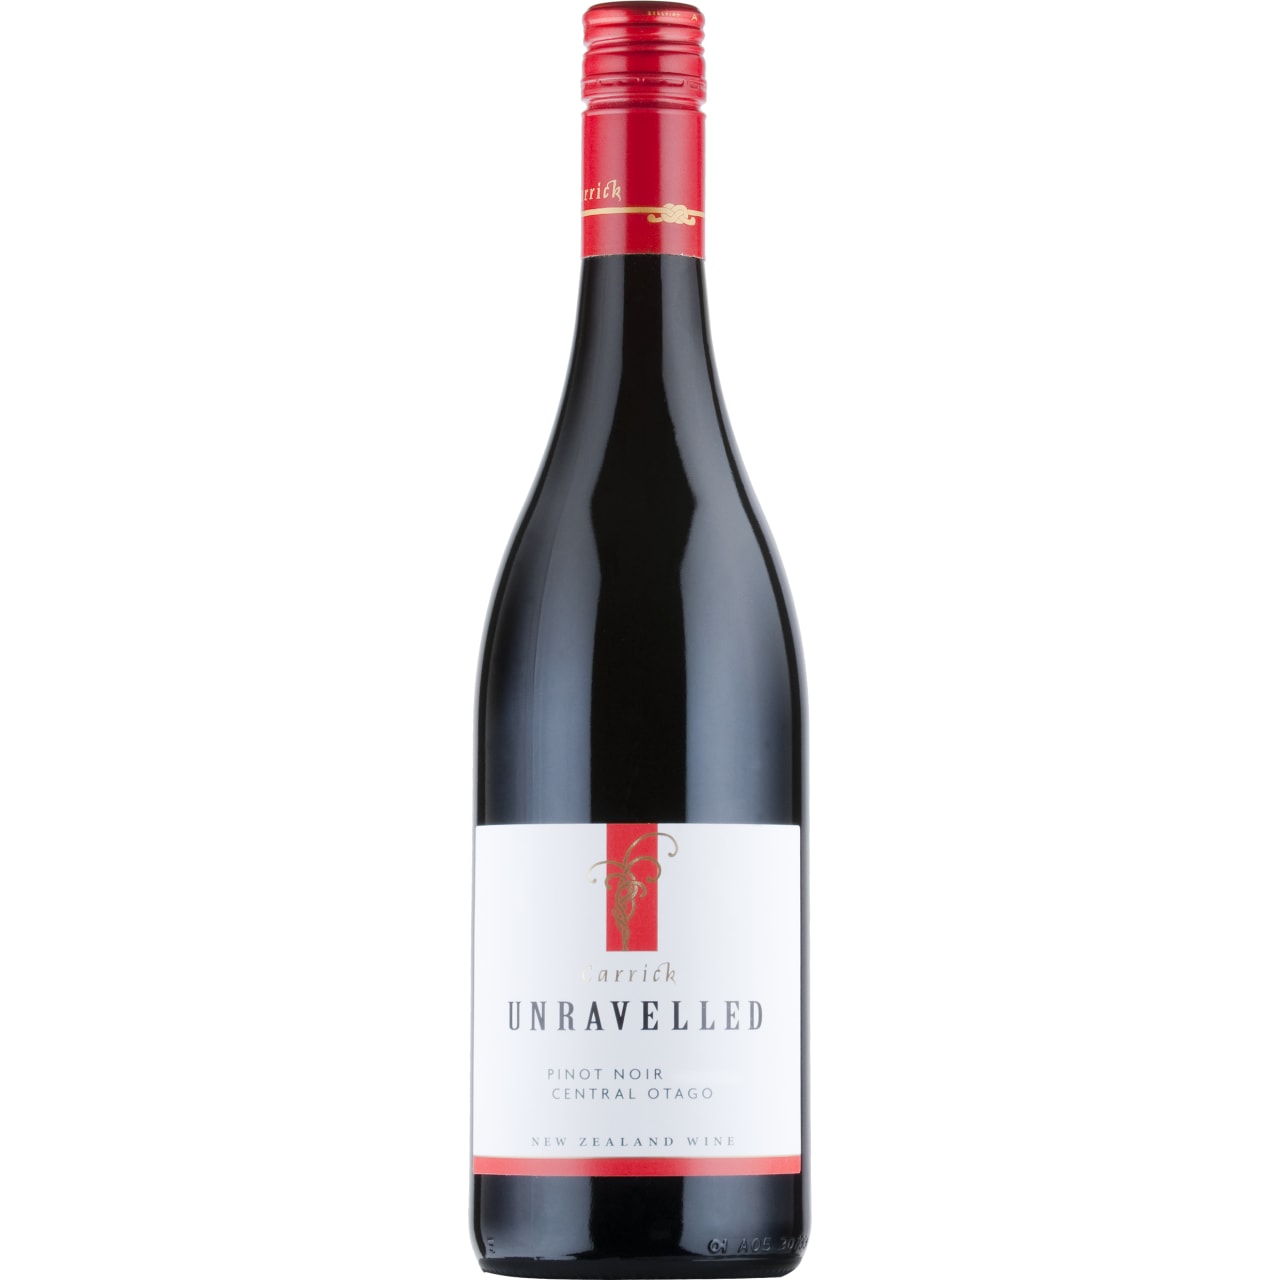 Aroma of luscious ripe redberries and black cherries, with notes of spice. Fine, integrated tannins provide a good structure underpinning a lovely fruit forward styled wine.